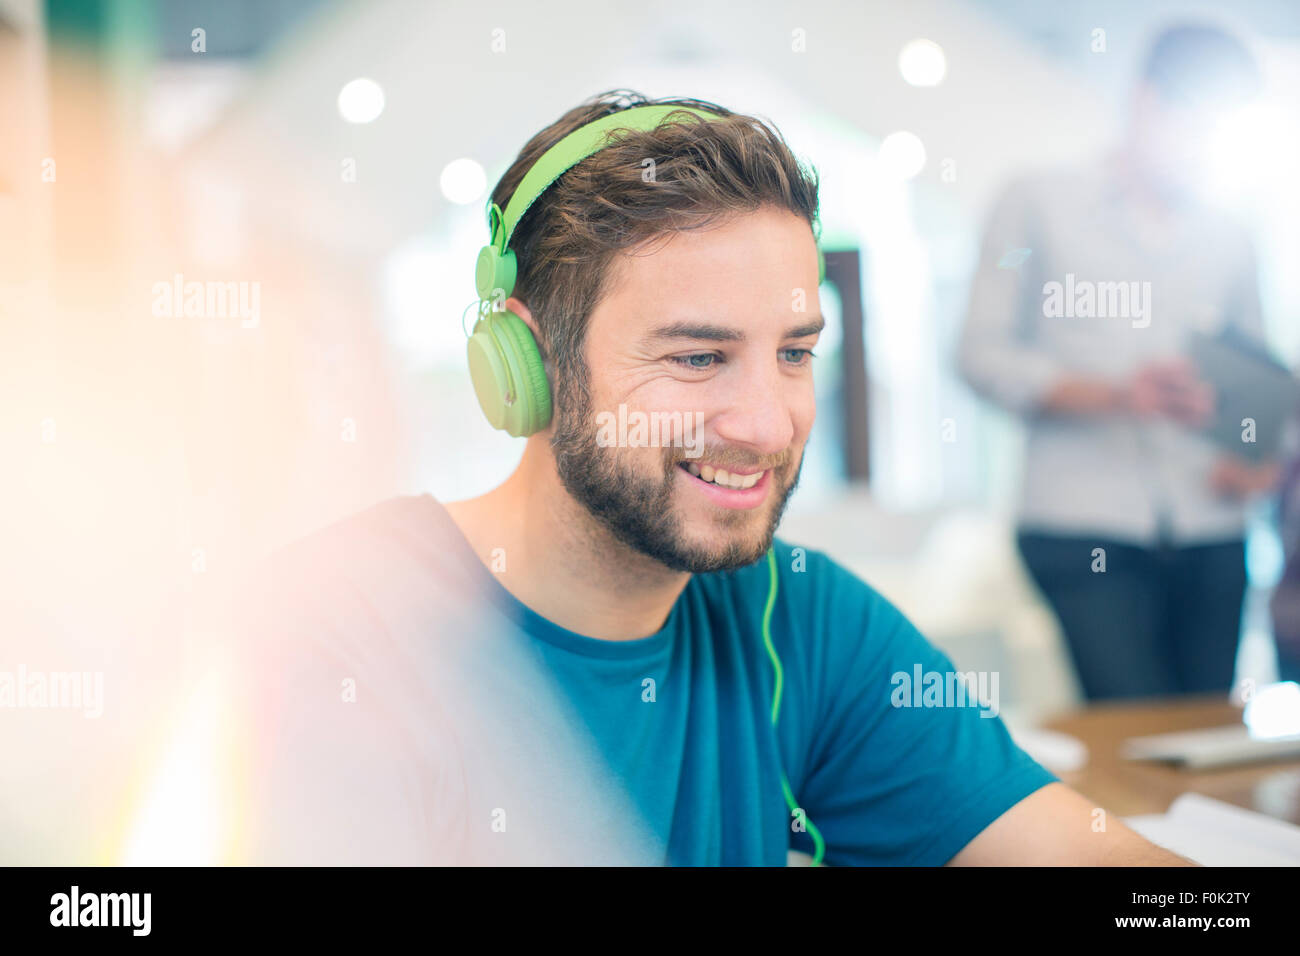 Smiling creative businessman listening to headphones in office Stock Photo